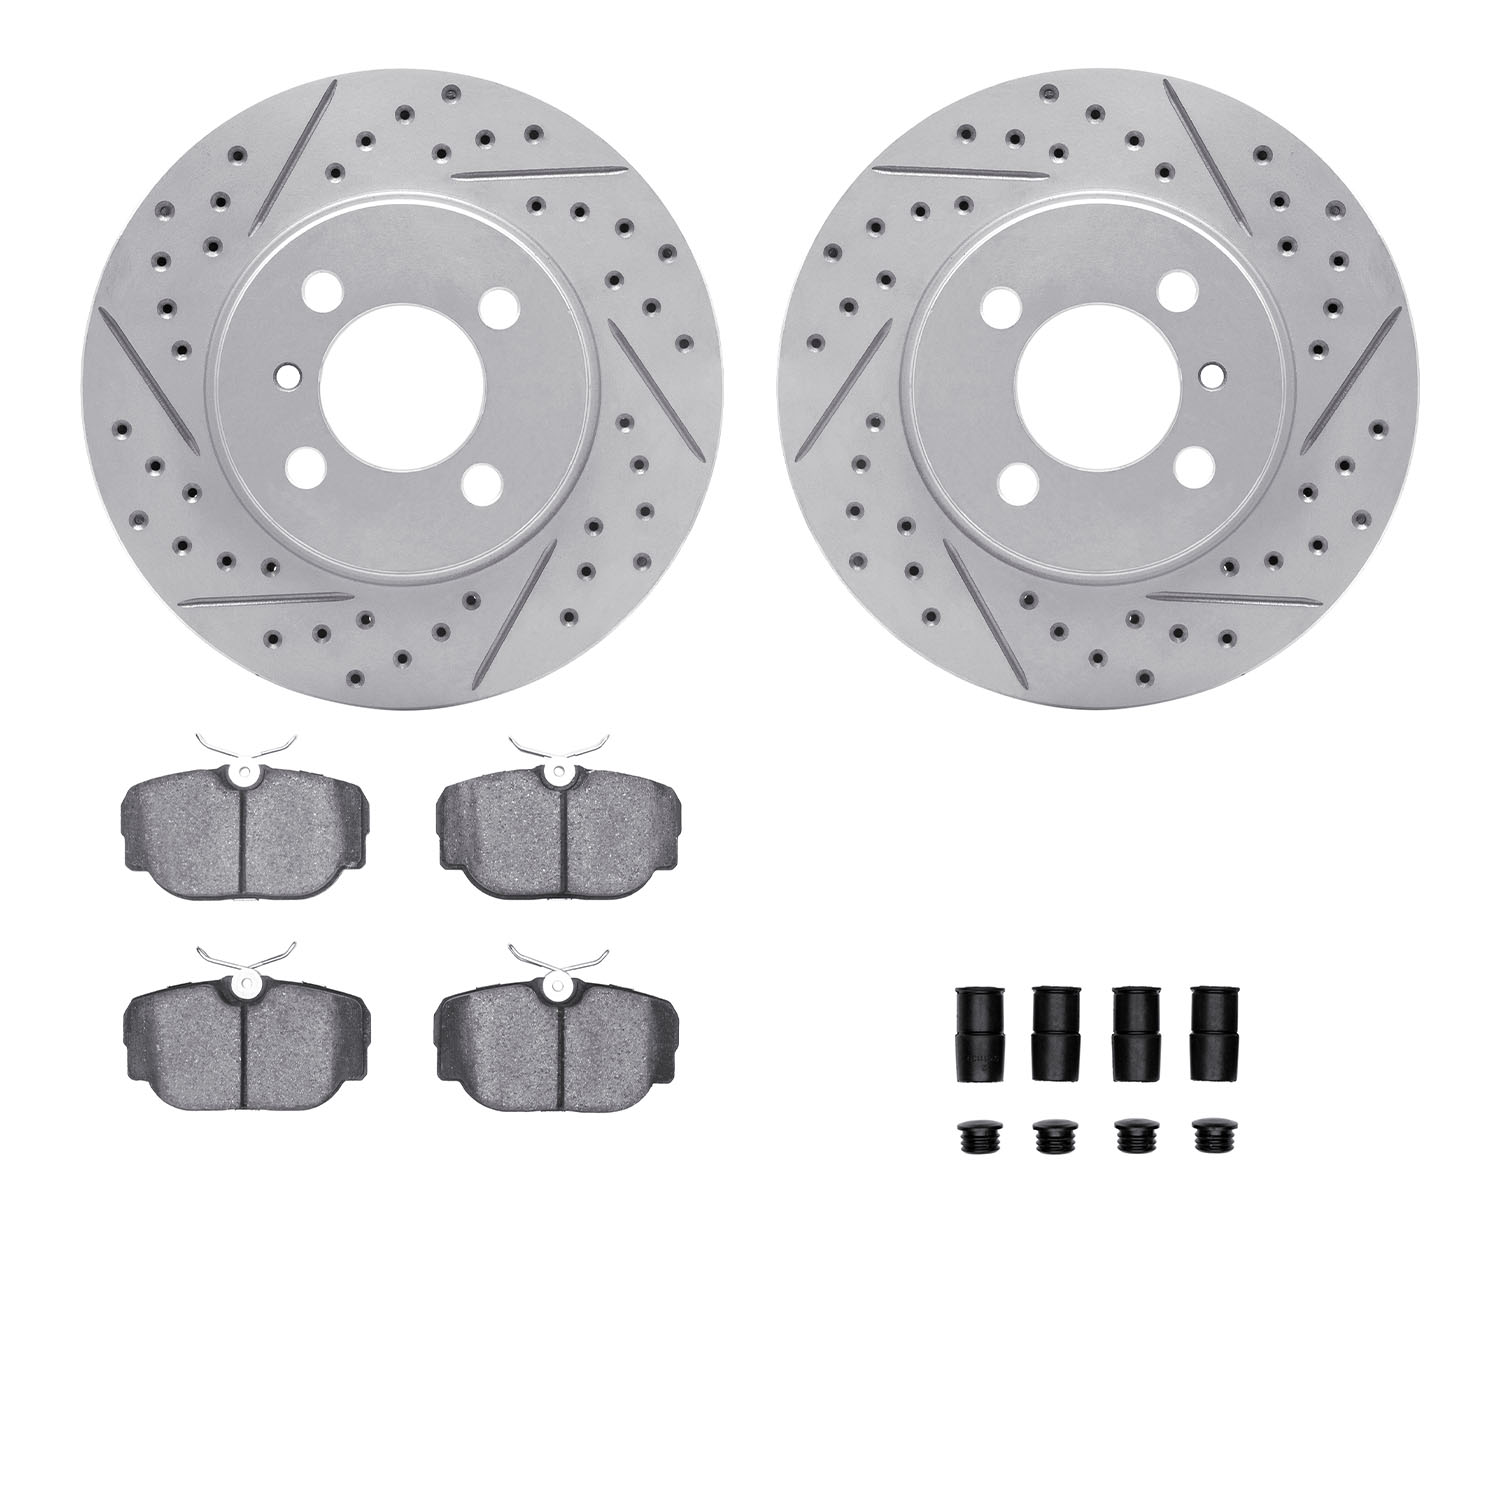 2512-31001 Geoperformance Drilled/Slotted Rotors w/5000 Advanced Brake Pads Kit & Hardware, 1984-1991 BMW, Position: Front